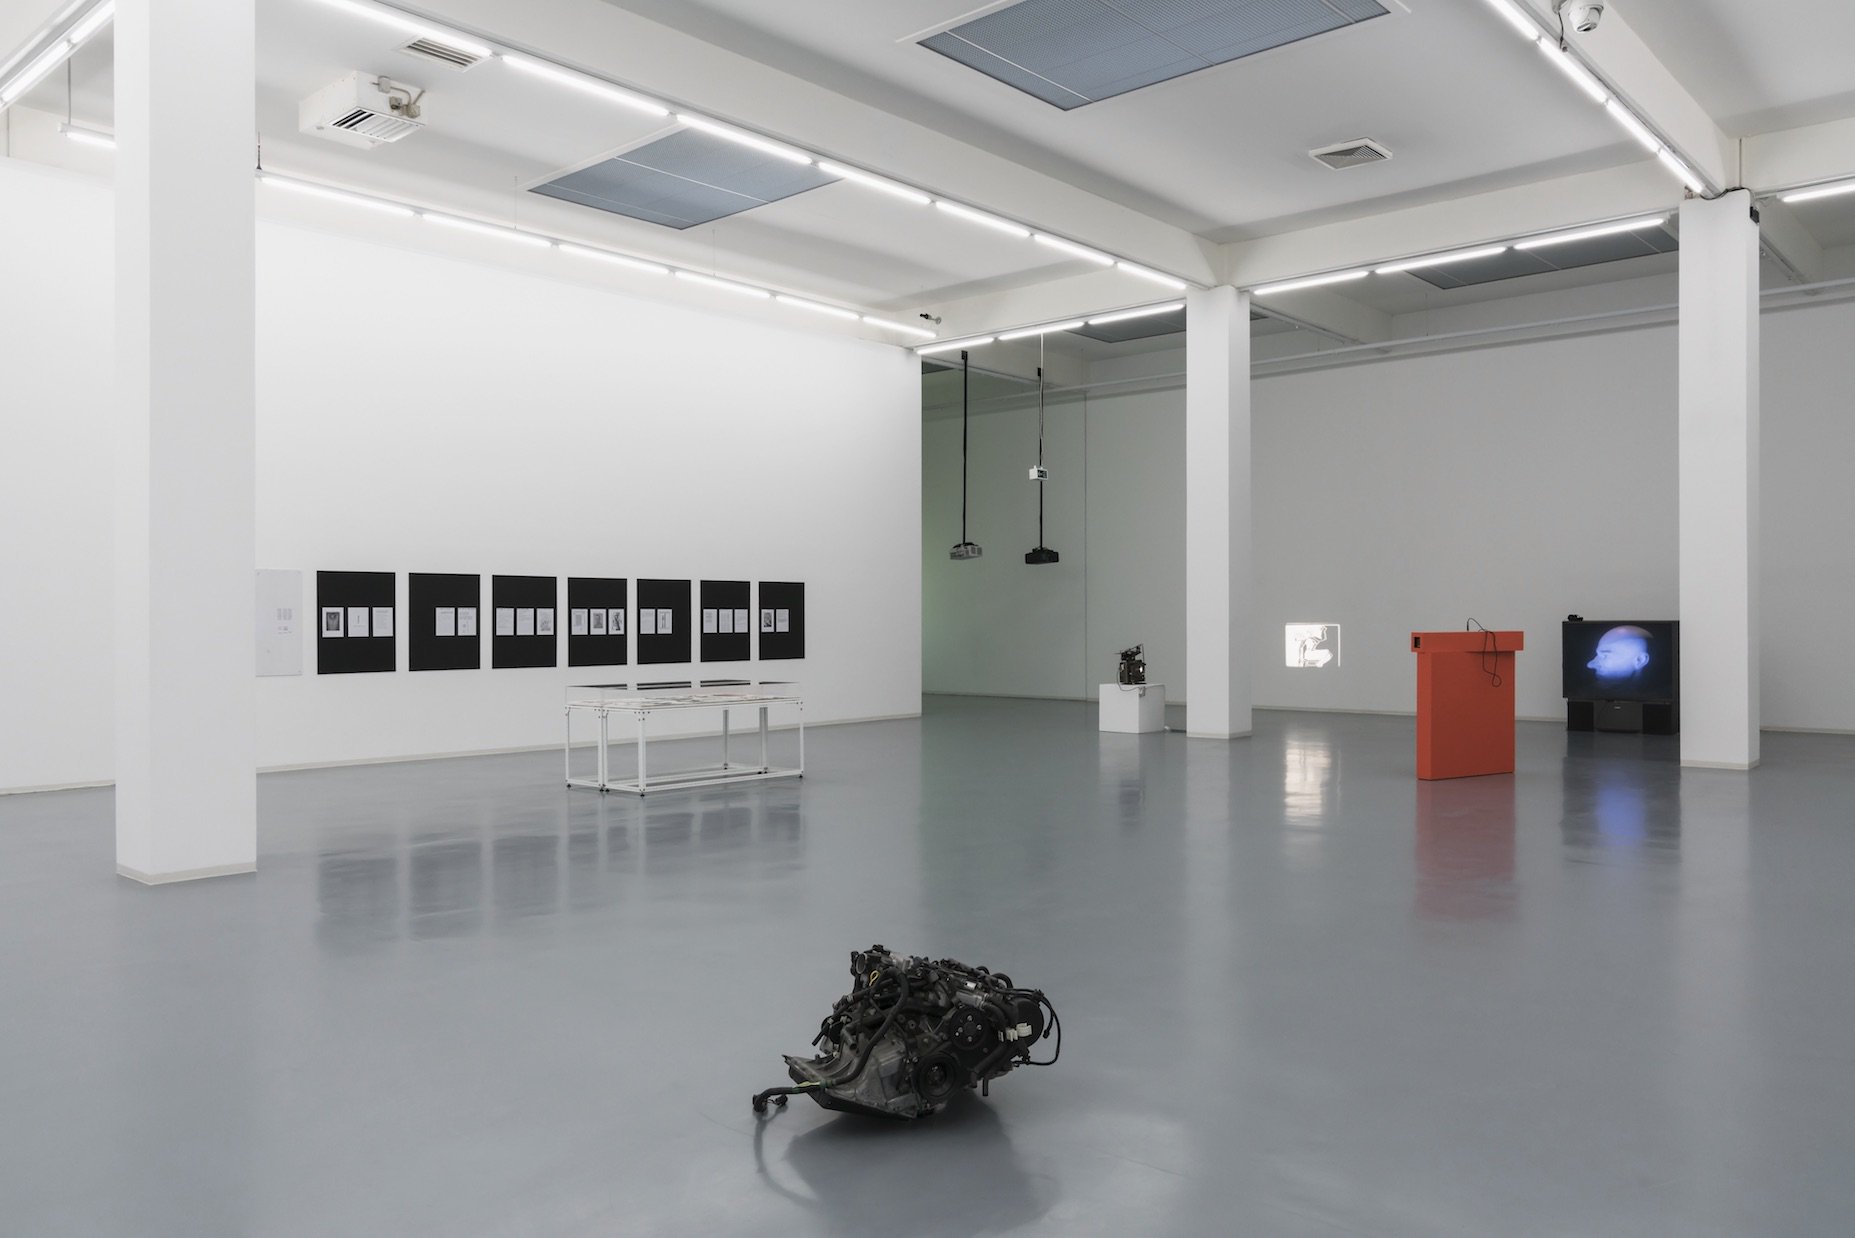 The Policeman’s Beard is Half Constructed: Art in the Age of Artificial Intelligence, Installation view, 2017, Bonner Kunstverein. Photo: Anne Pöhlmann